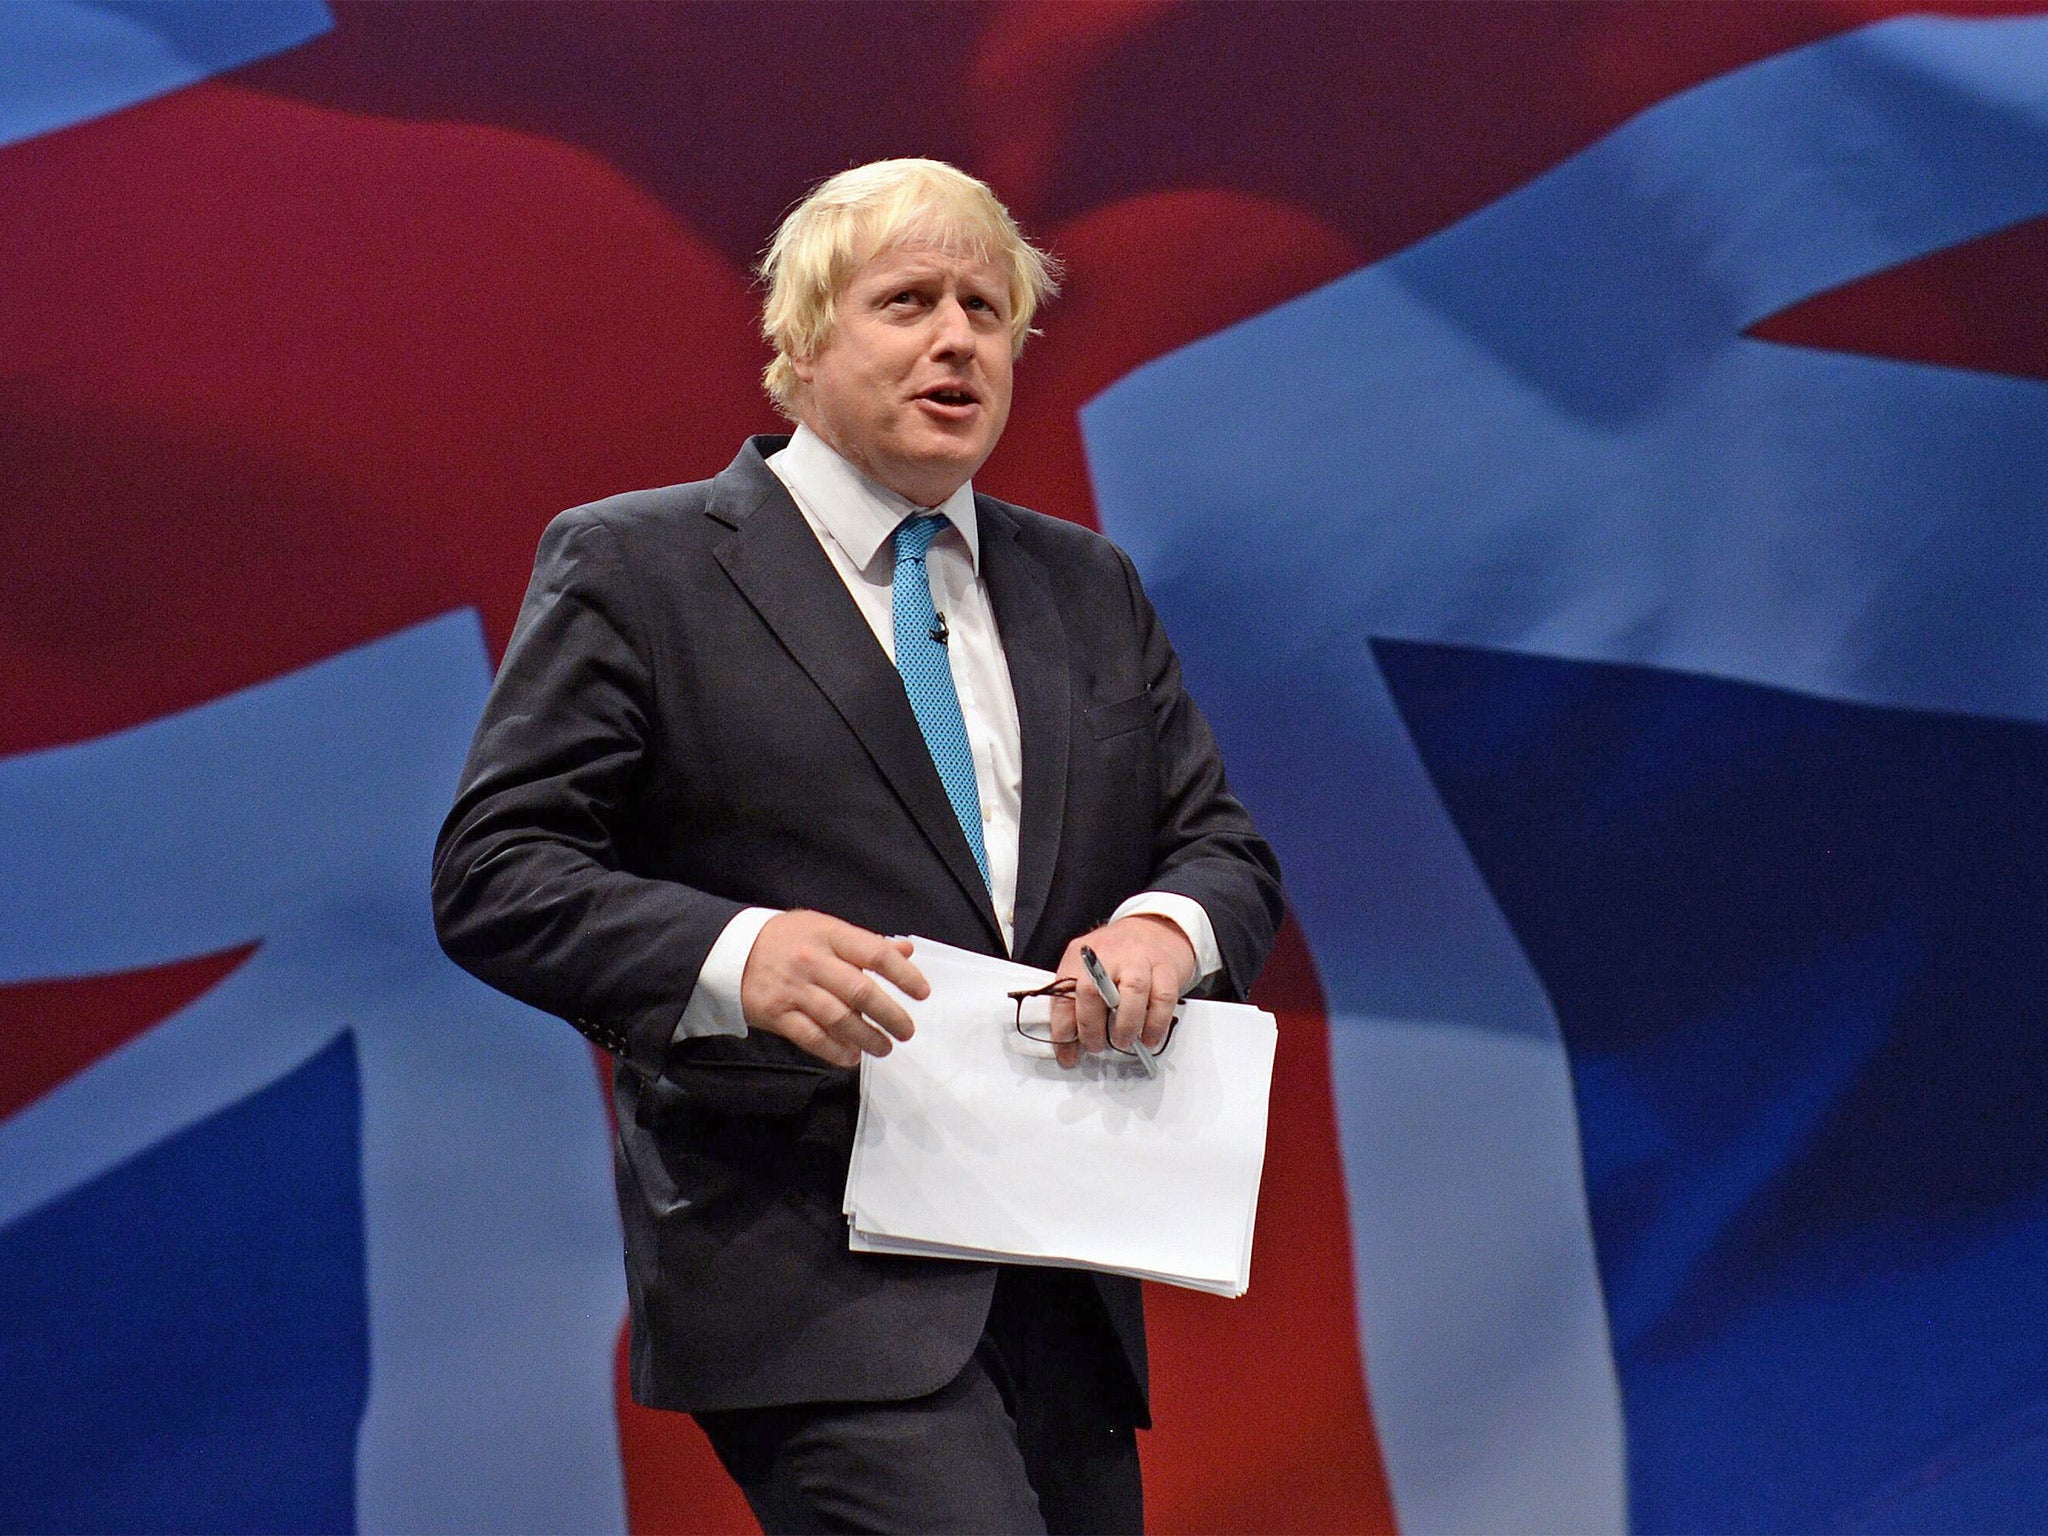 London’s Mayor Boris Johnson played to the crowd at the Conservative Party Conference